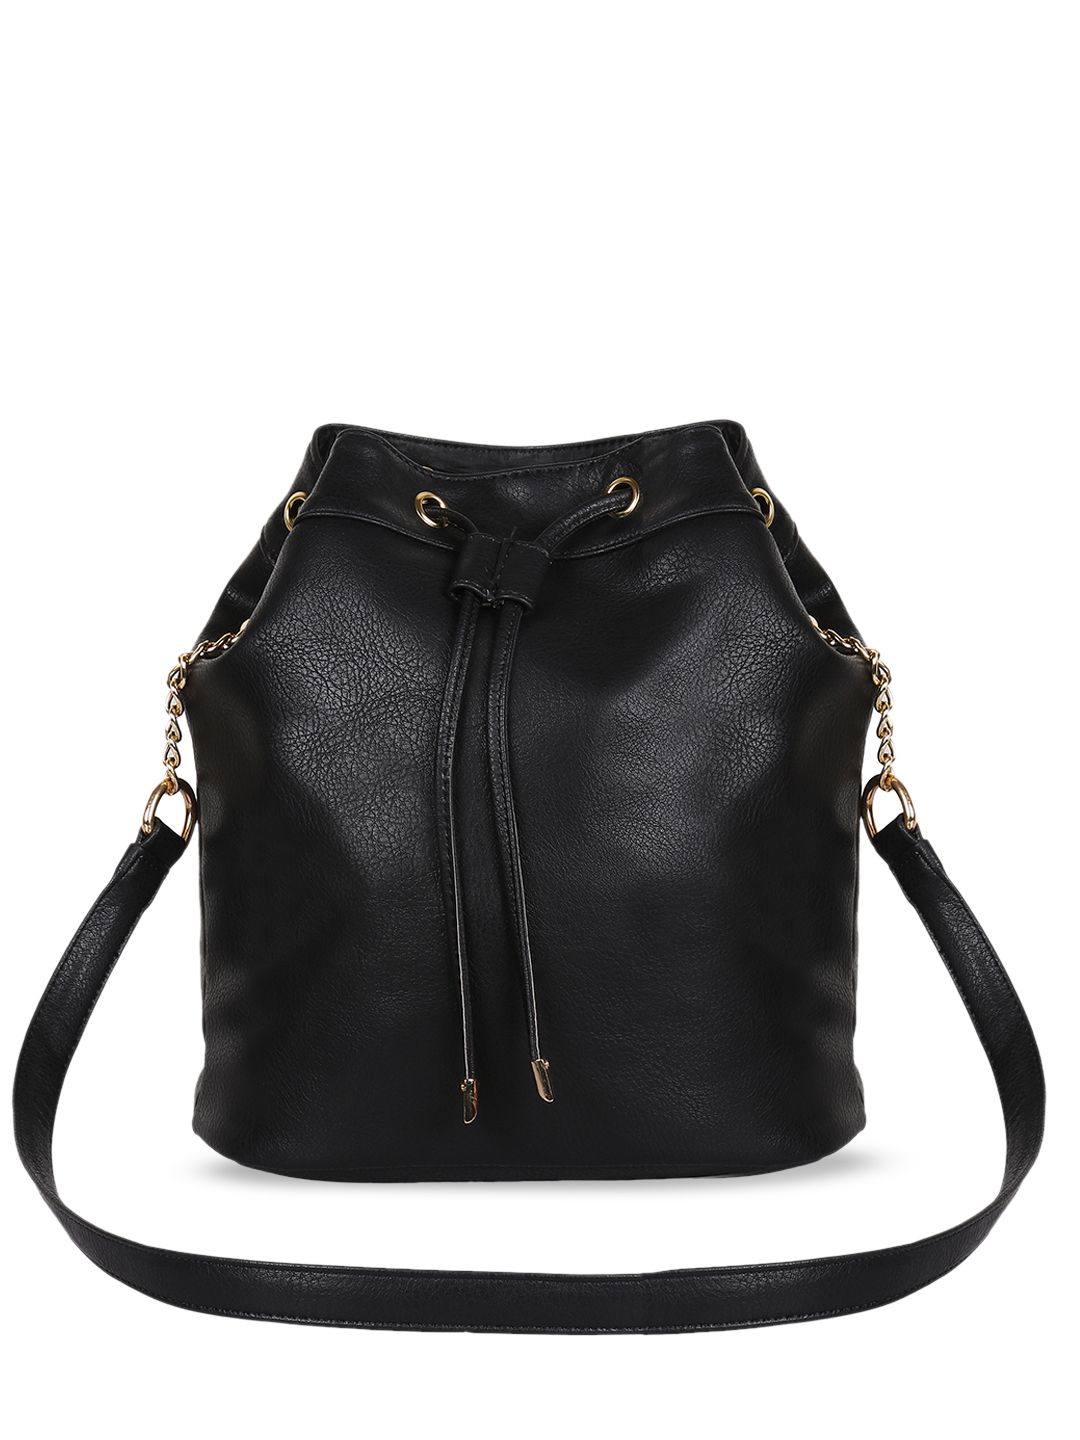 Lychee bags Black Solid Sling Bag Price in India